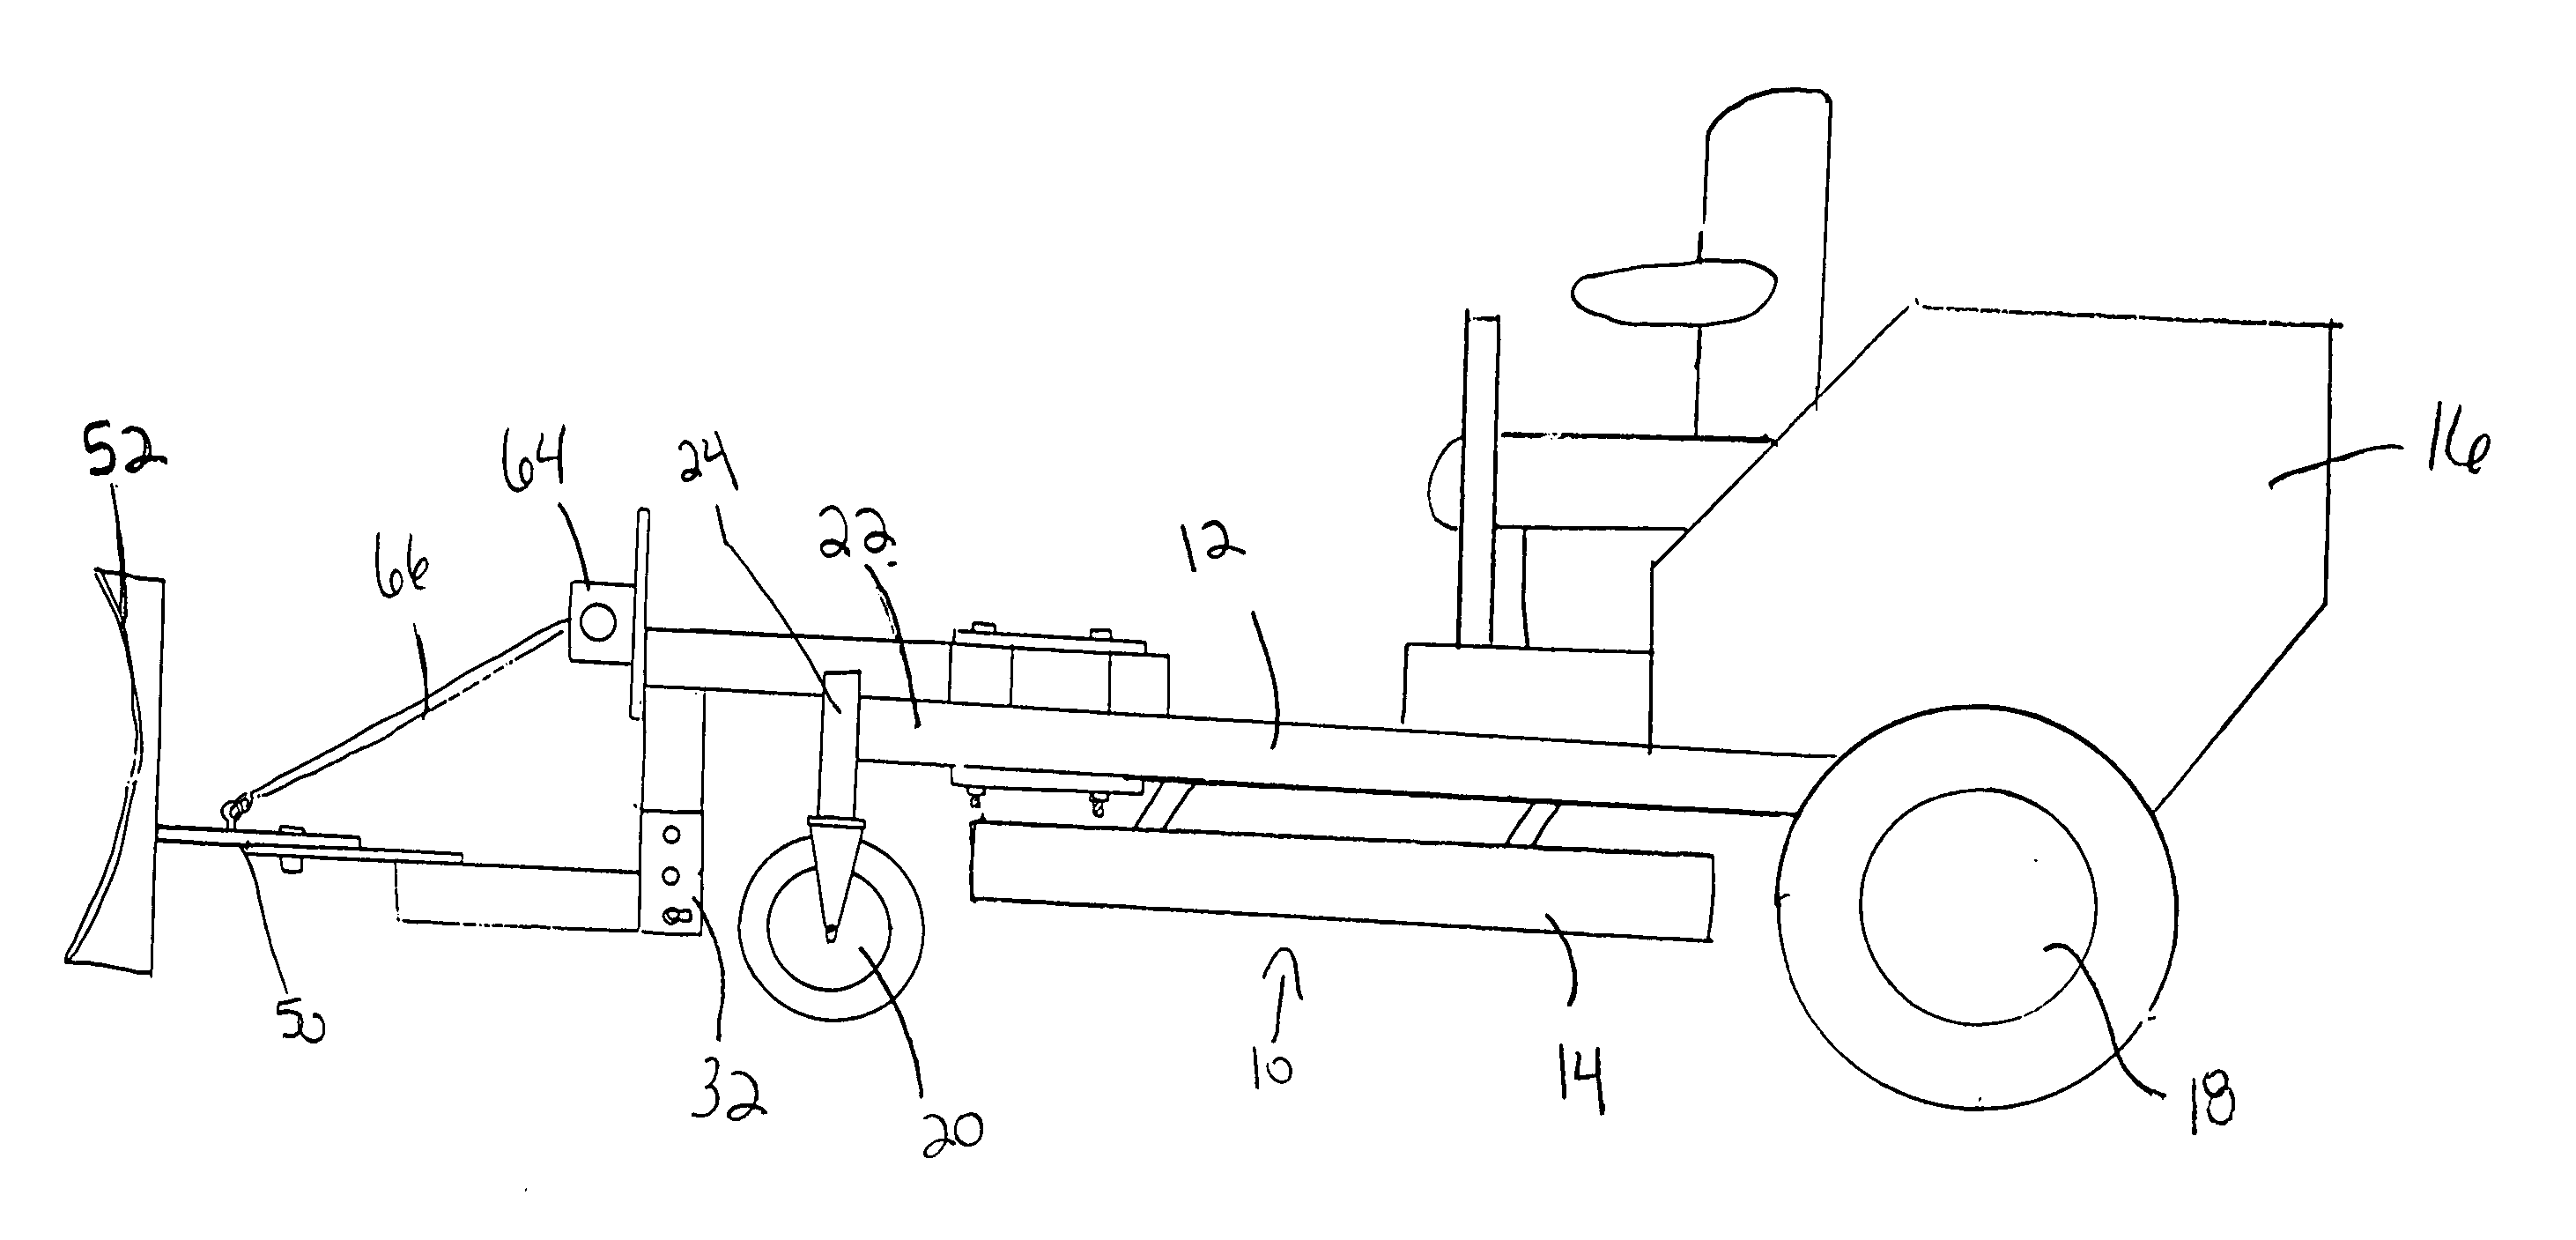 Snow plow and attachment system for zero turning radius mower